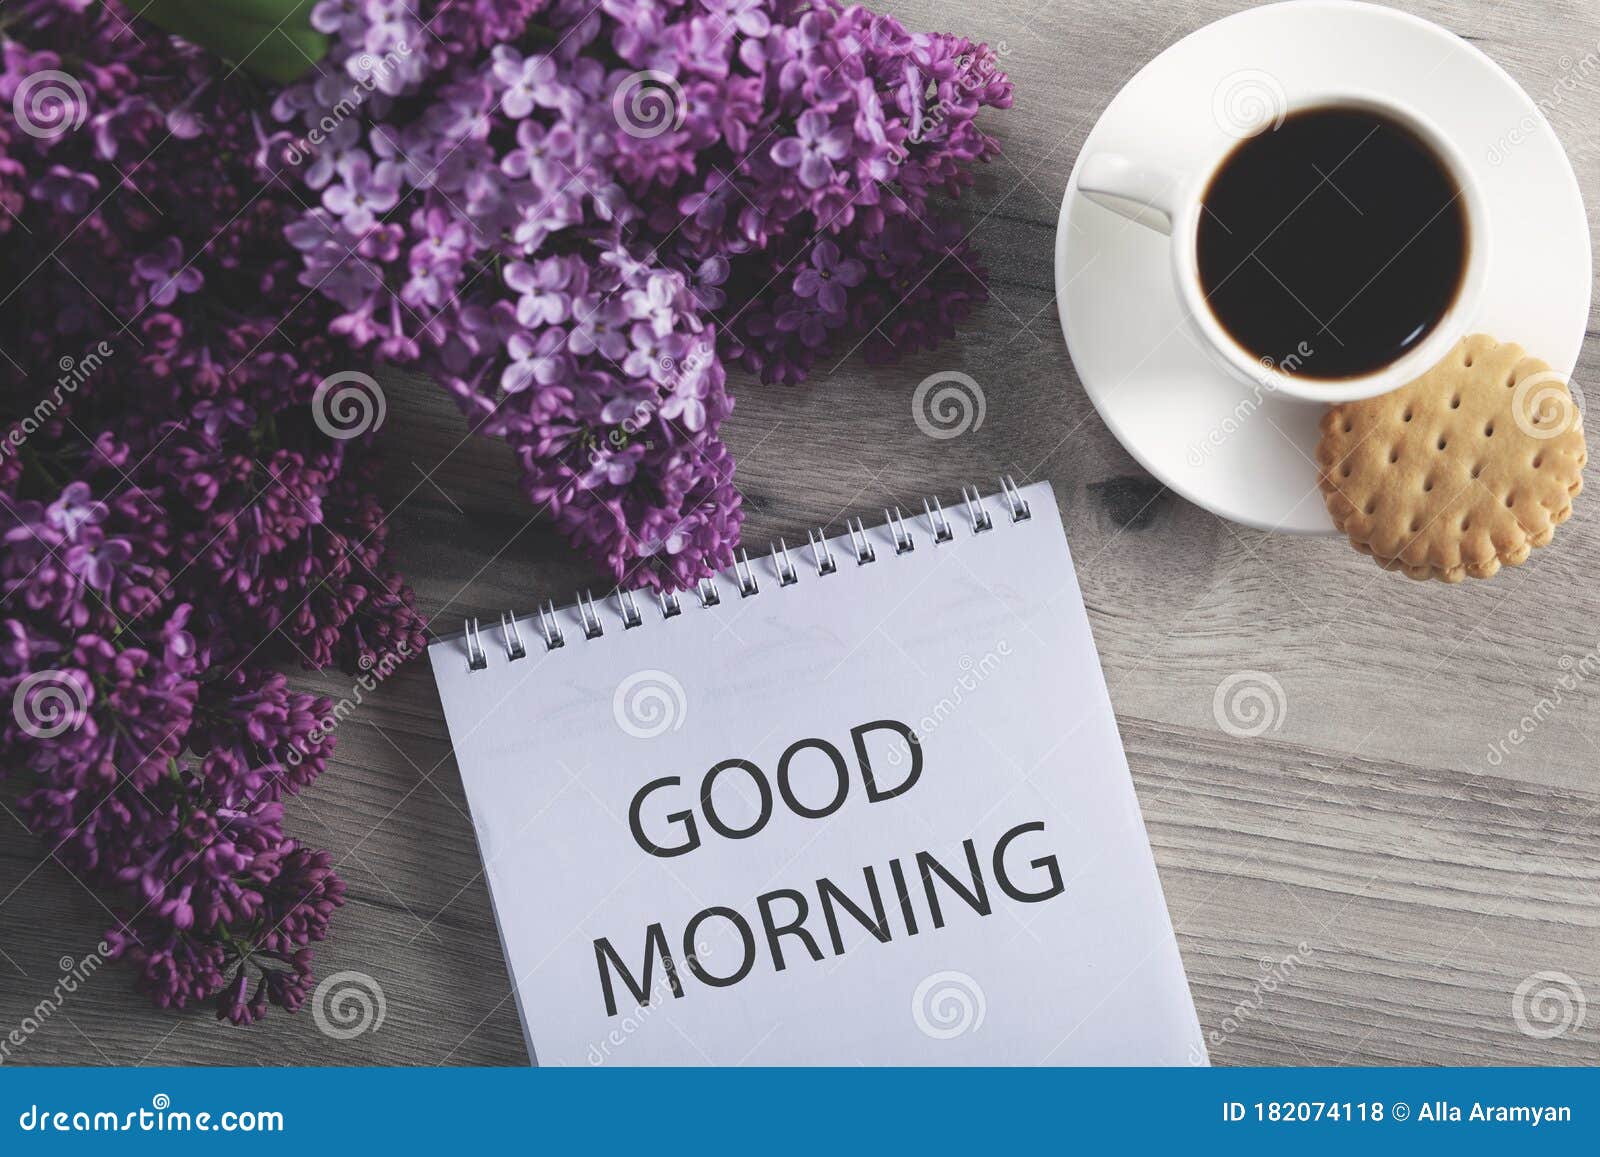 Good Morning and Coffee with Lilac on Table Stock Photo - Image of ...